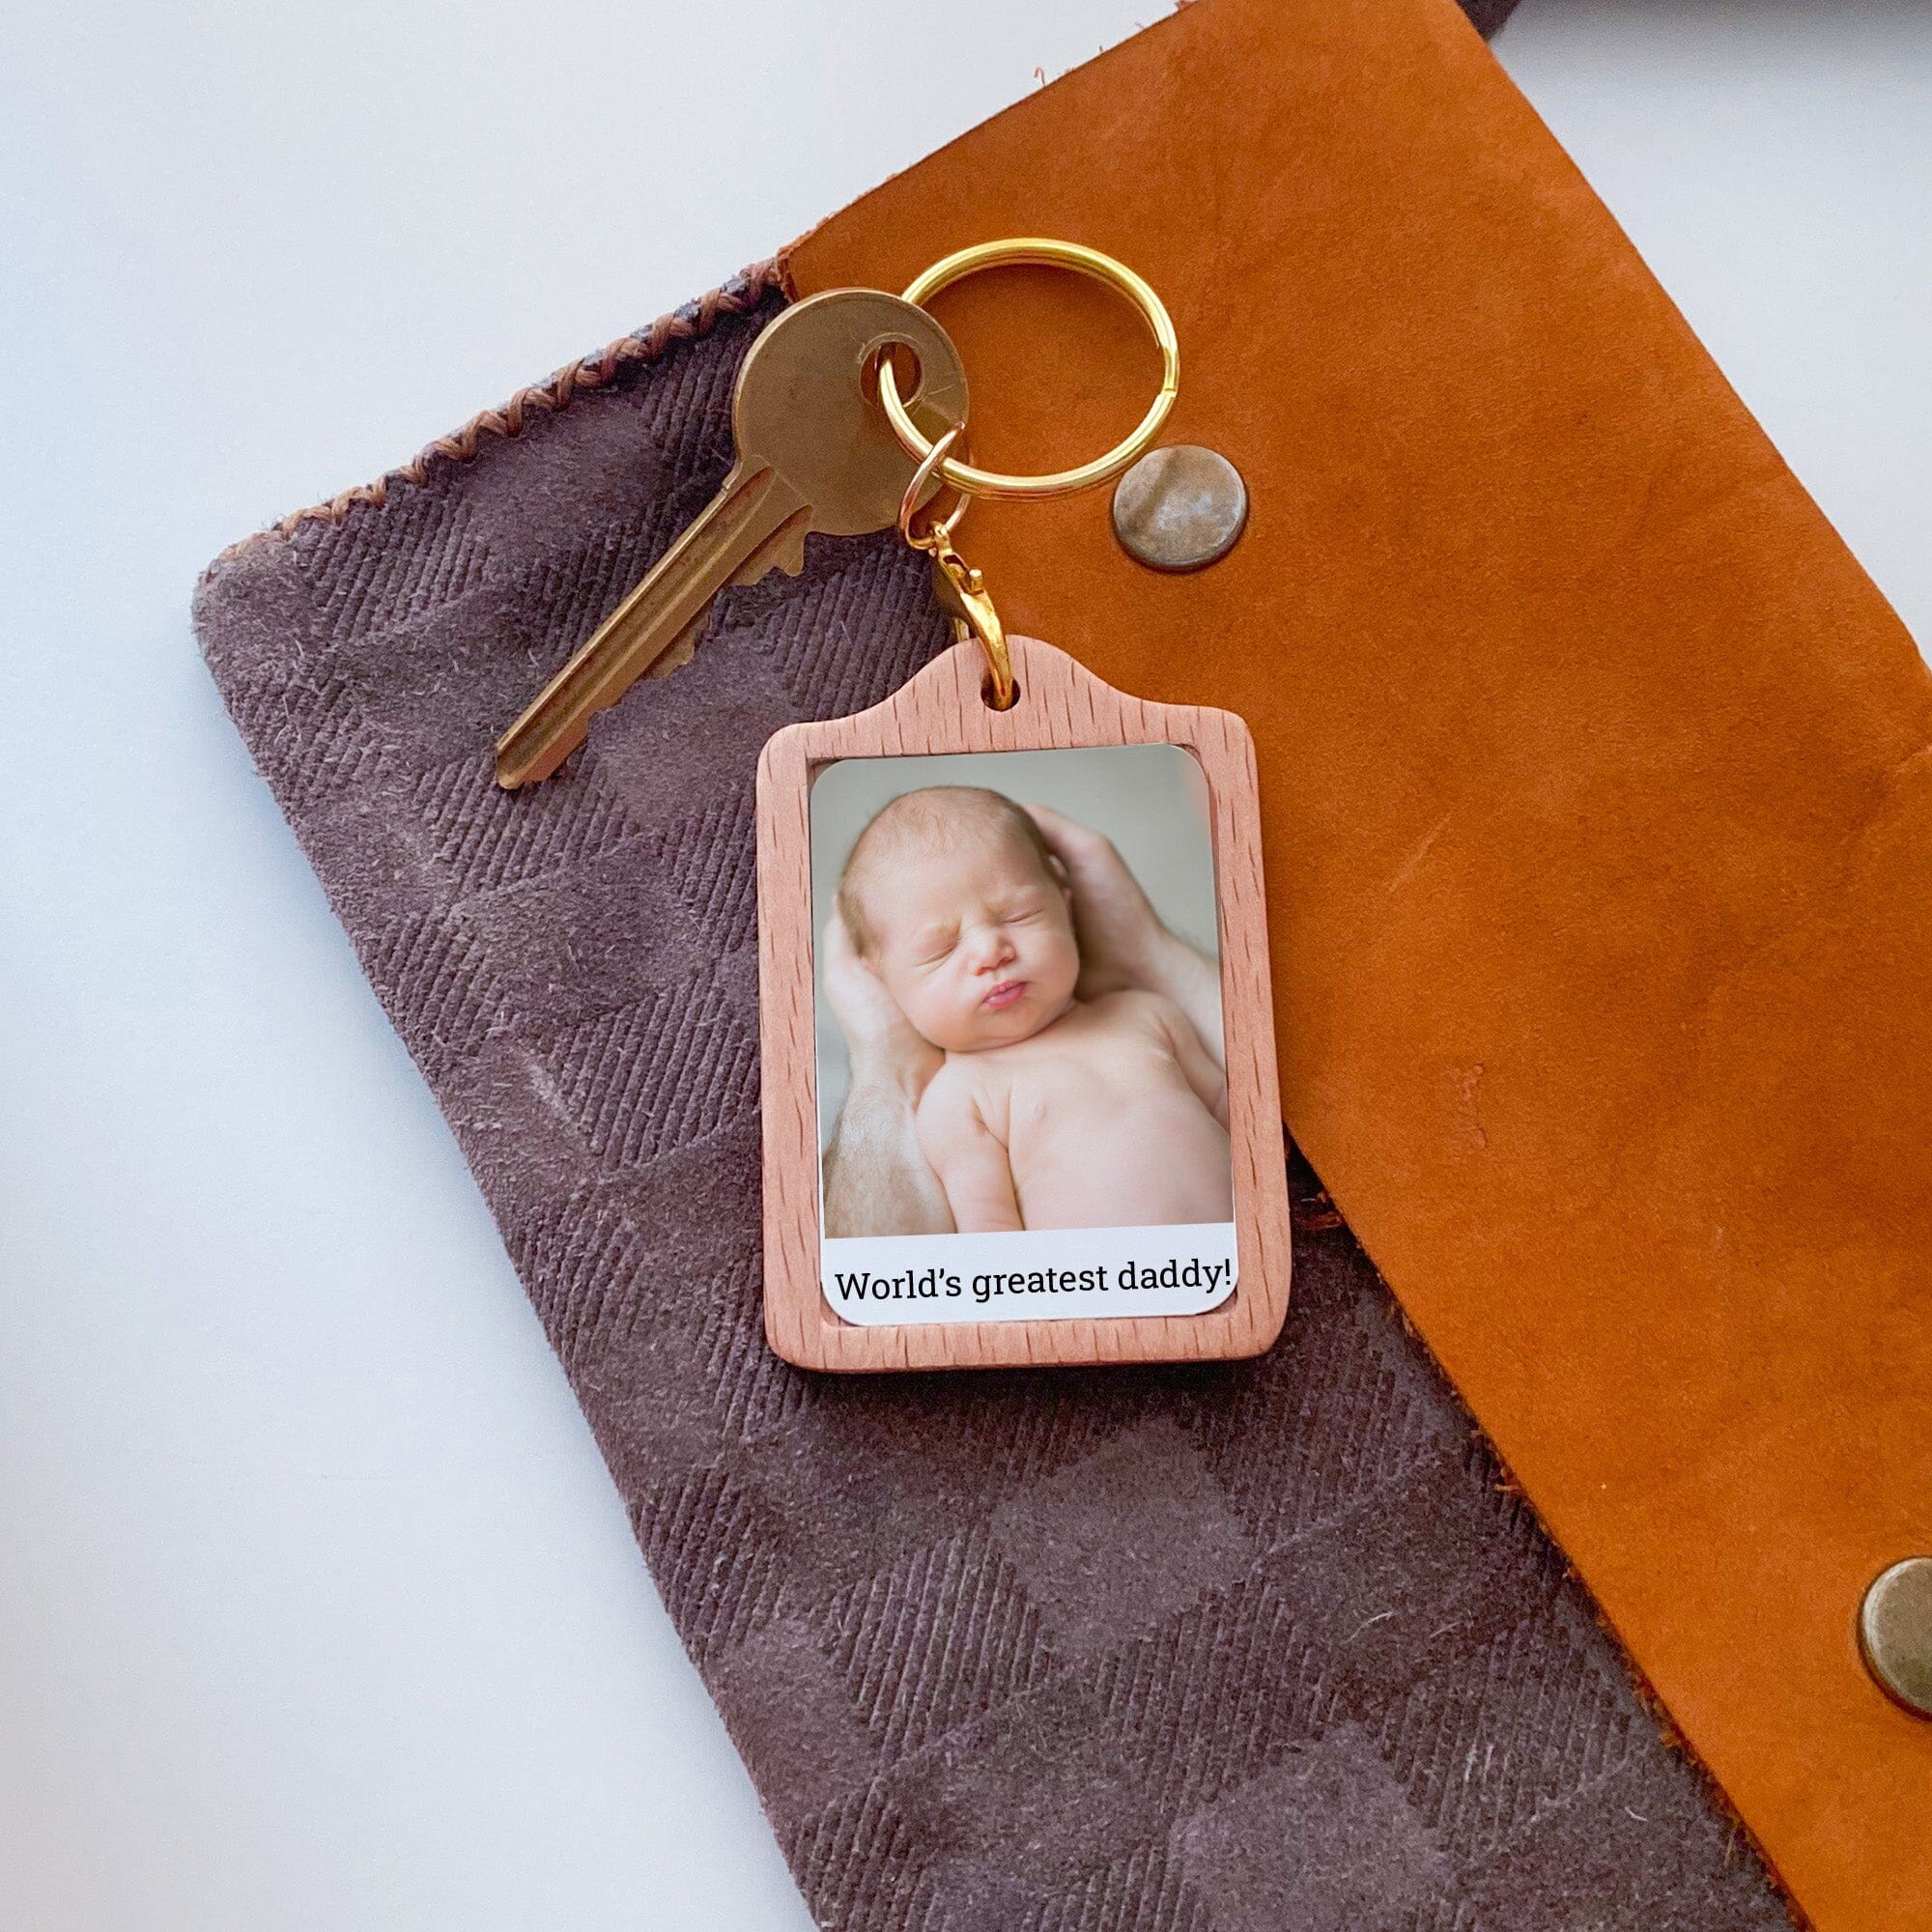 Personalised Wooden Photo Keyring With Text, Father'S Day Gift, Keepsake For Him Dad Uncle Grandad, Christmas Birthday